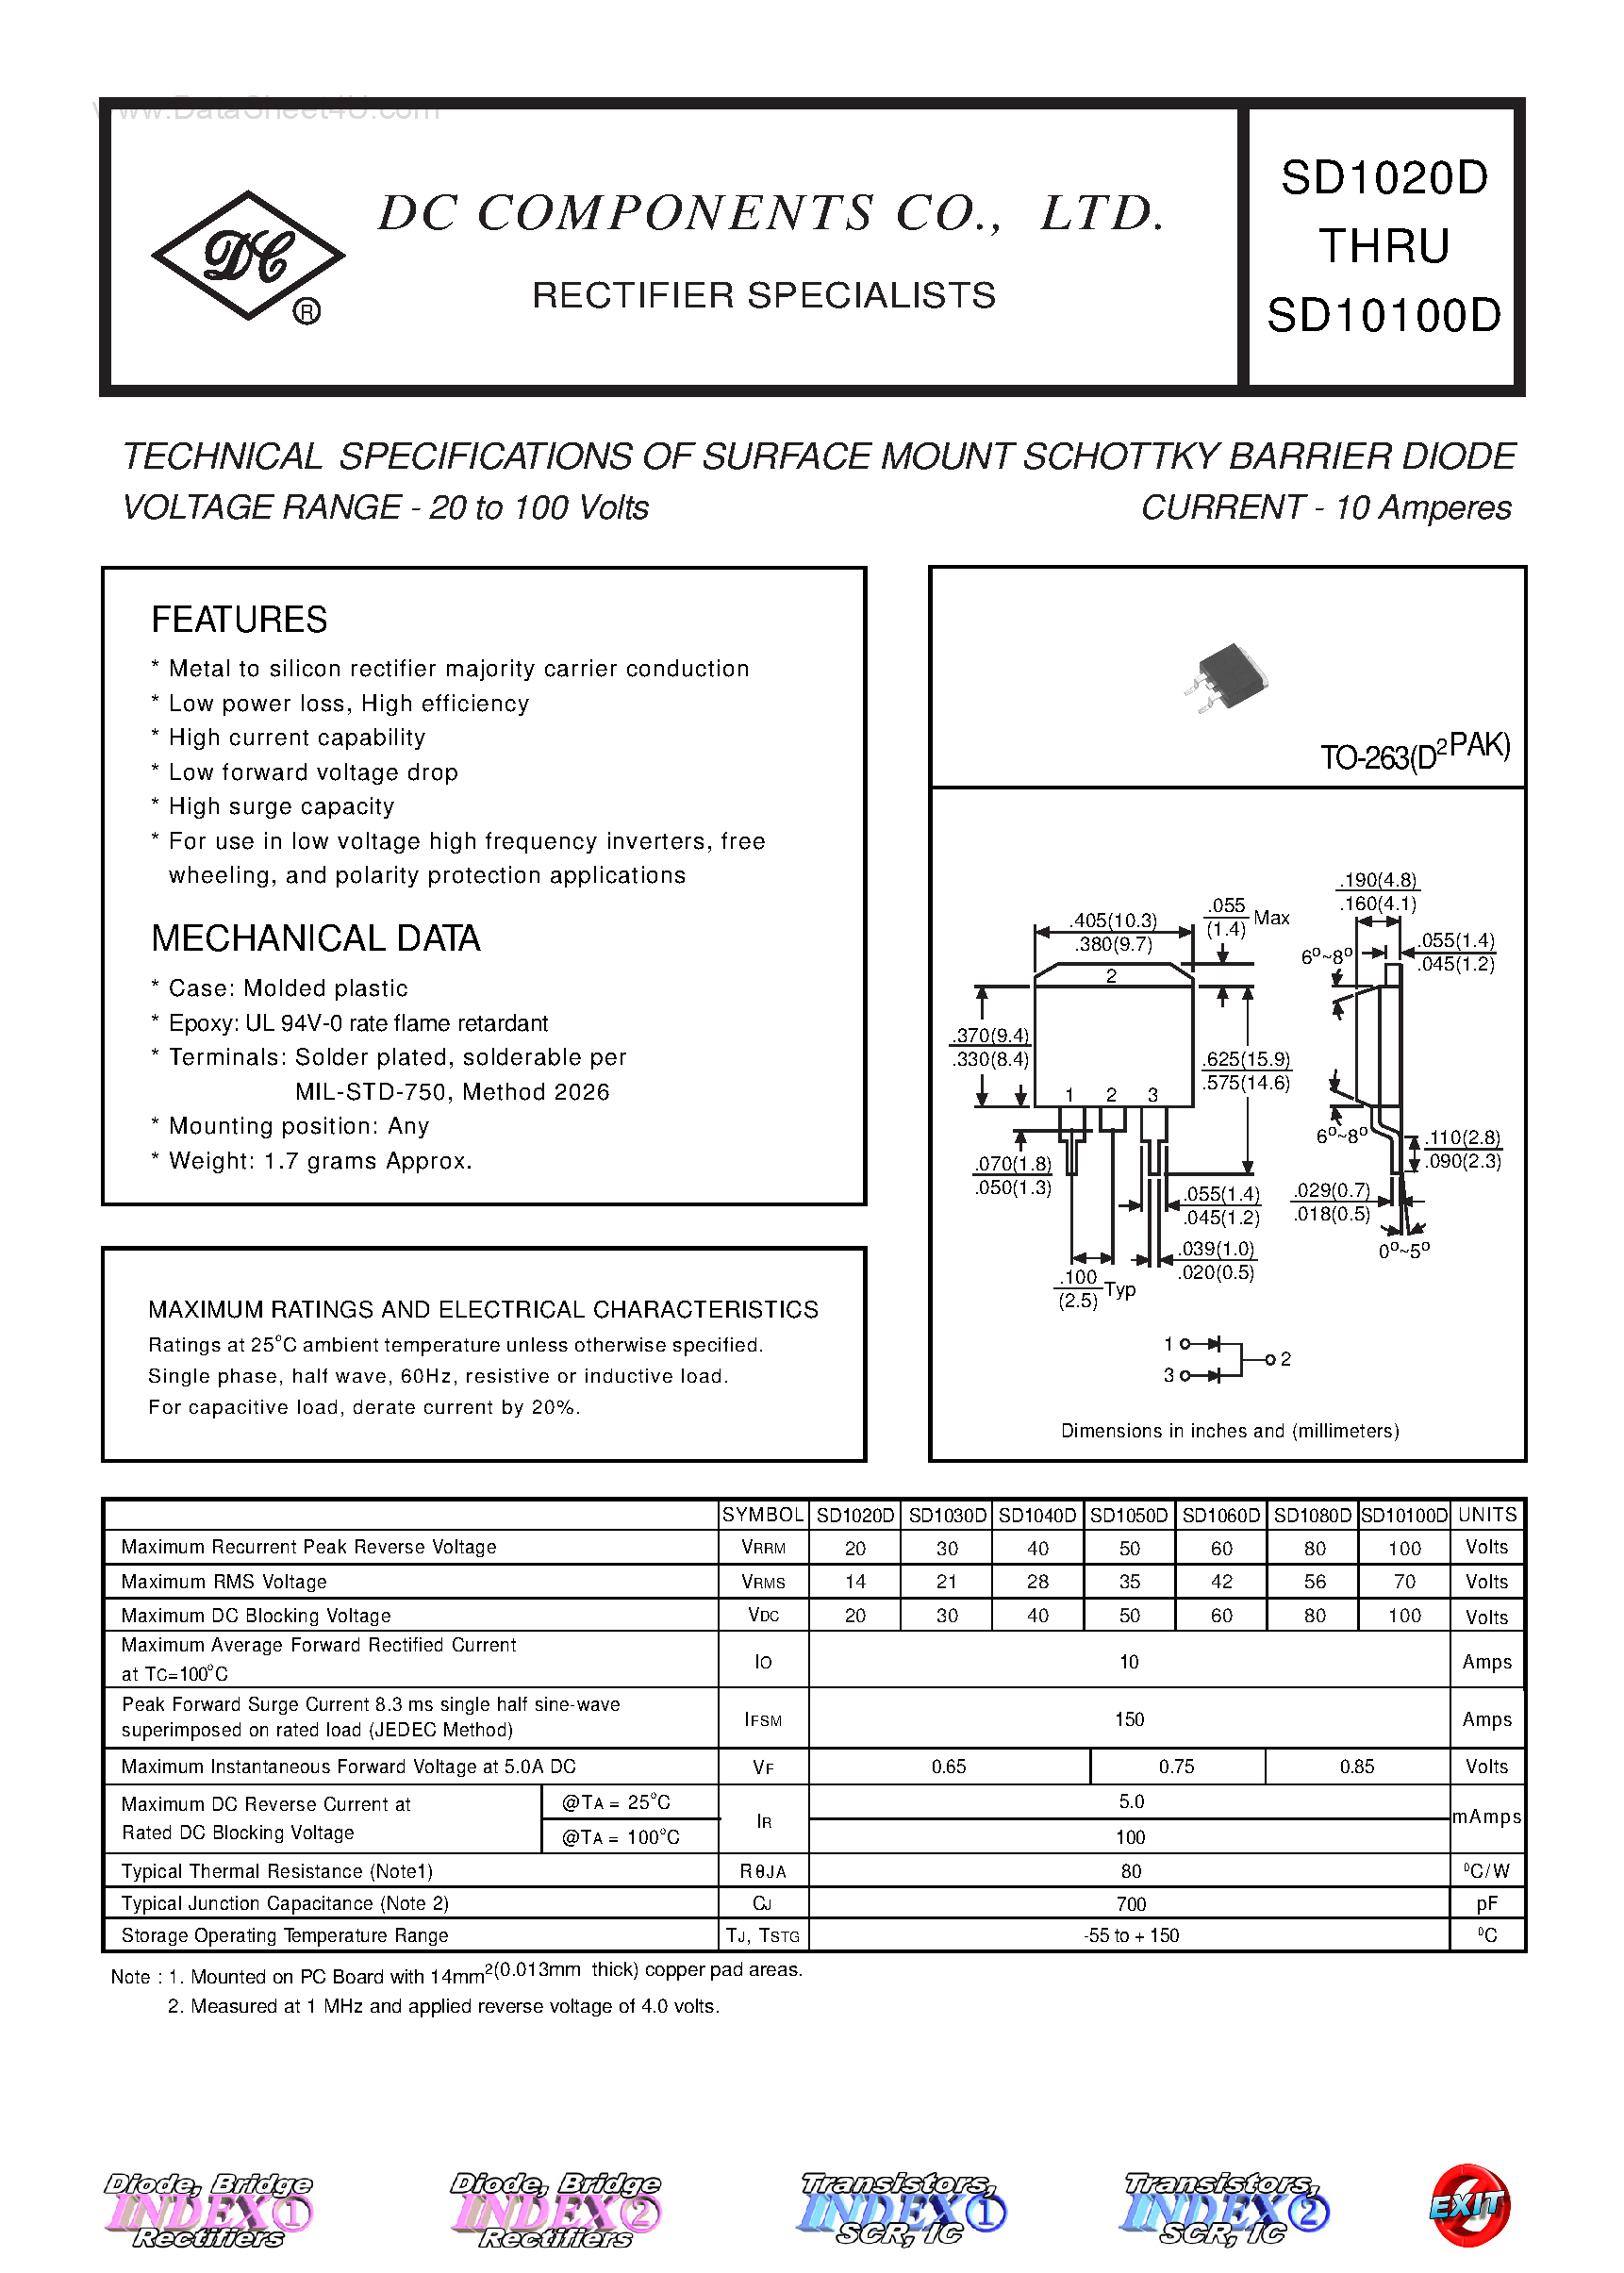 Даташит SD10100D - (SD1020D - SD10100D) TECHNICAL SPECIFICATIONS OF SURFACE MOUNT SCHOTTKY BARRIER DIODE страница 1